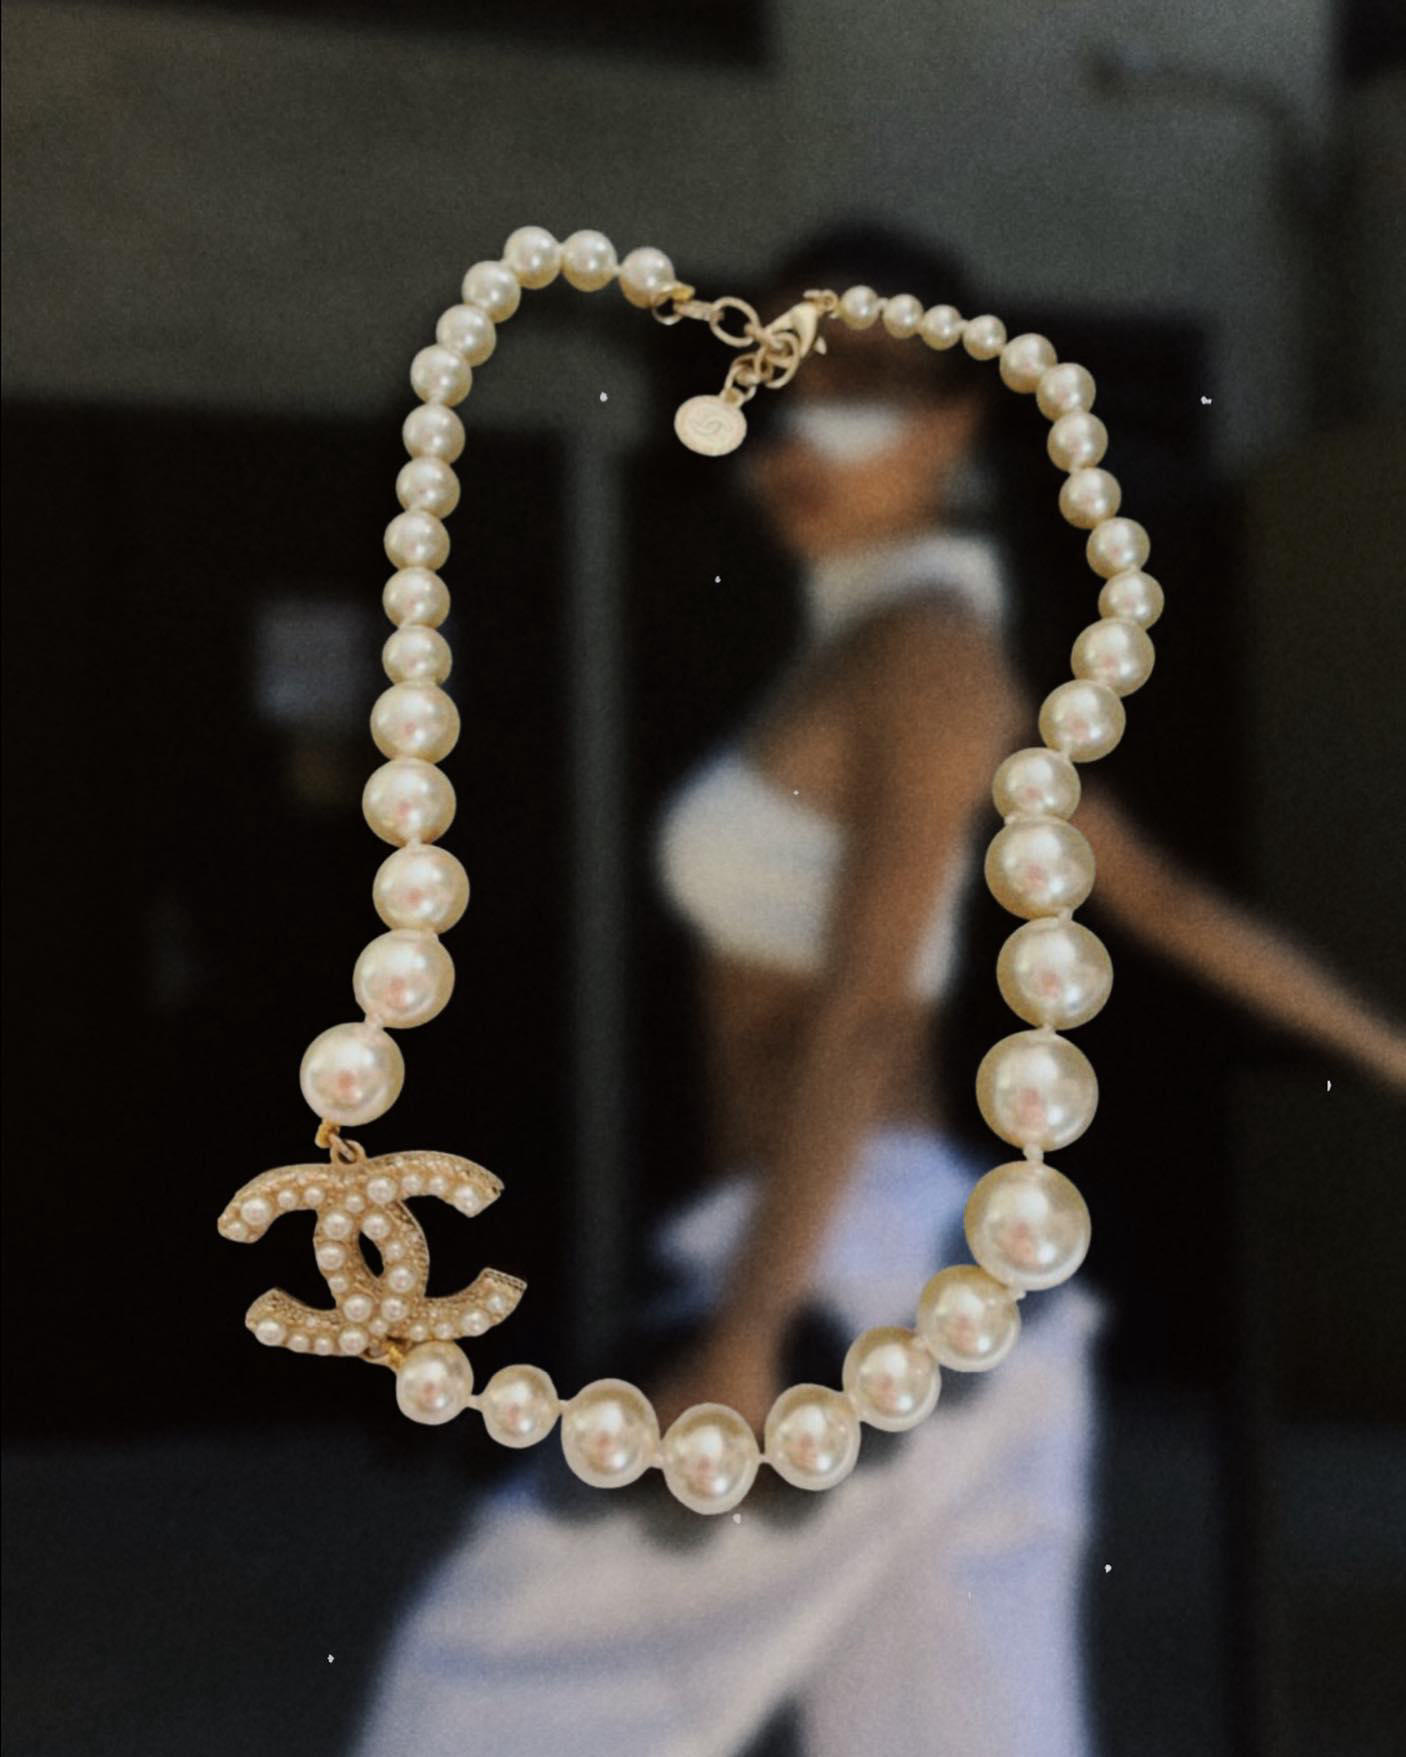 Cover me in pearls